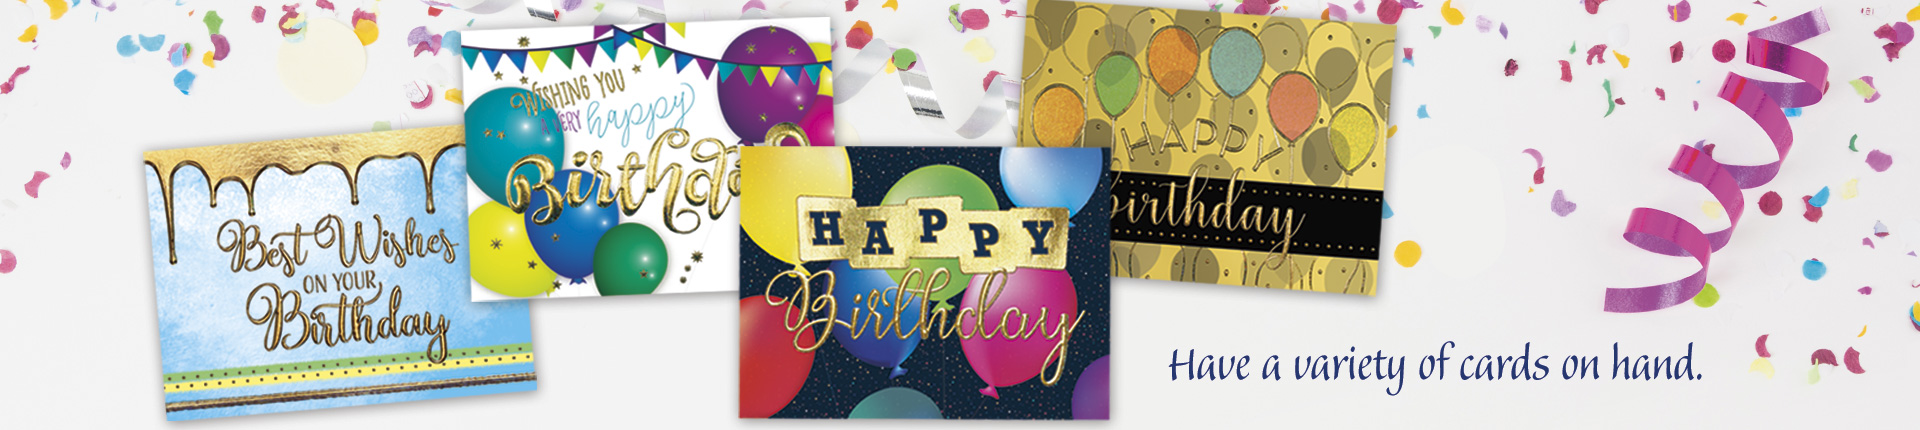 Employee Assortment Packs - Employee Greeting Cards | Posty Cards